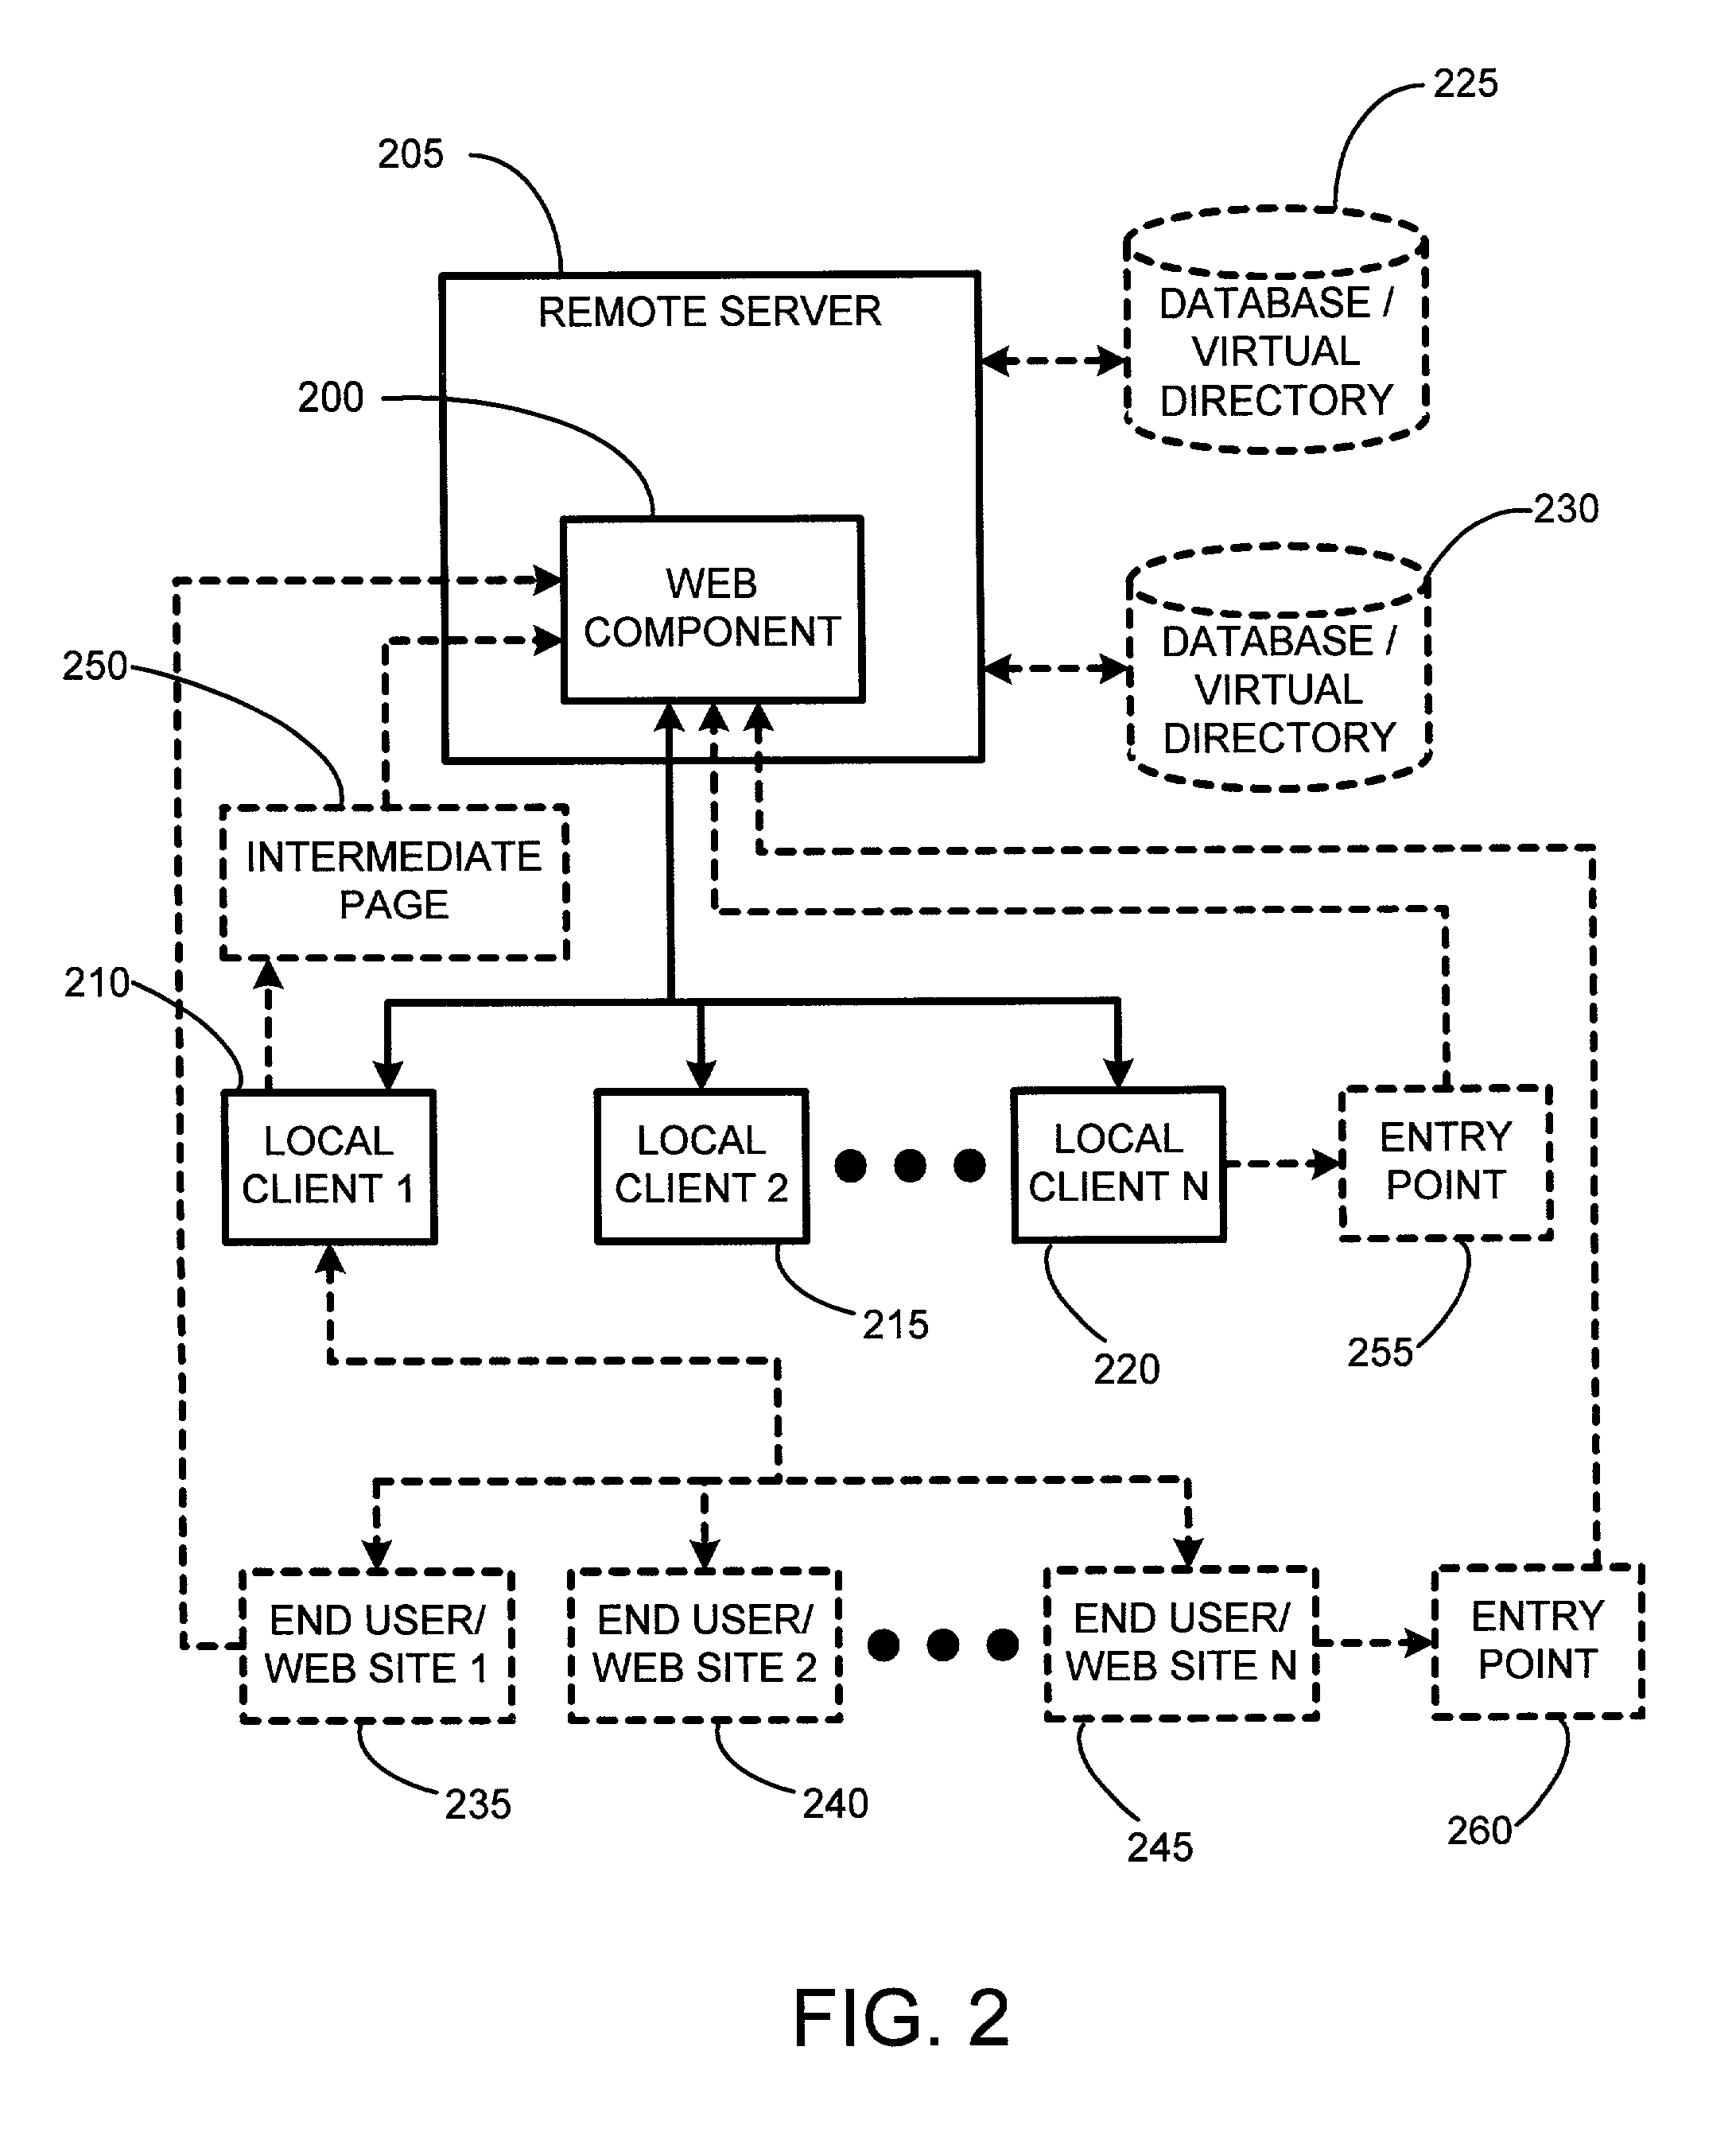 System and method for using dynamic web components to remotely control the security state of web pages